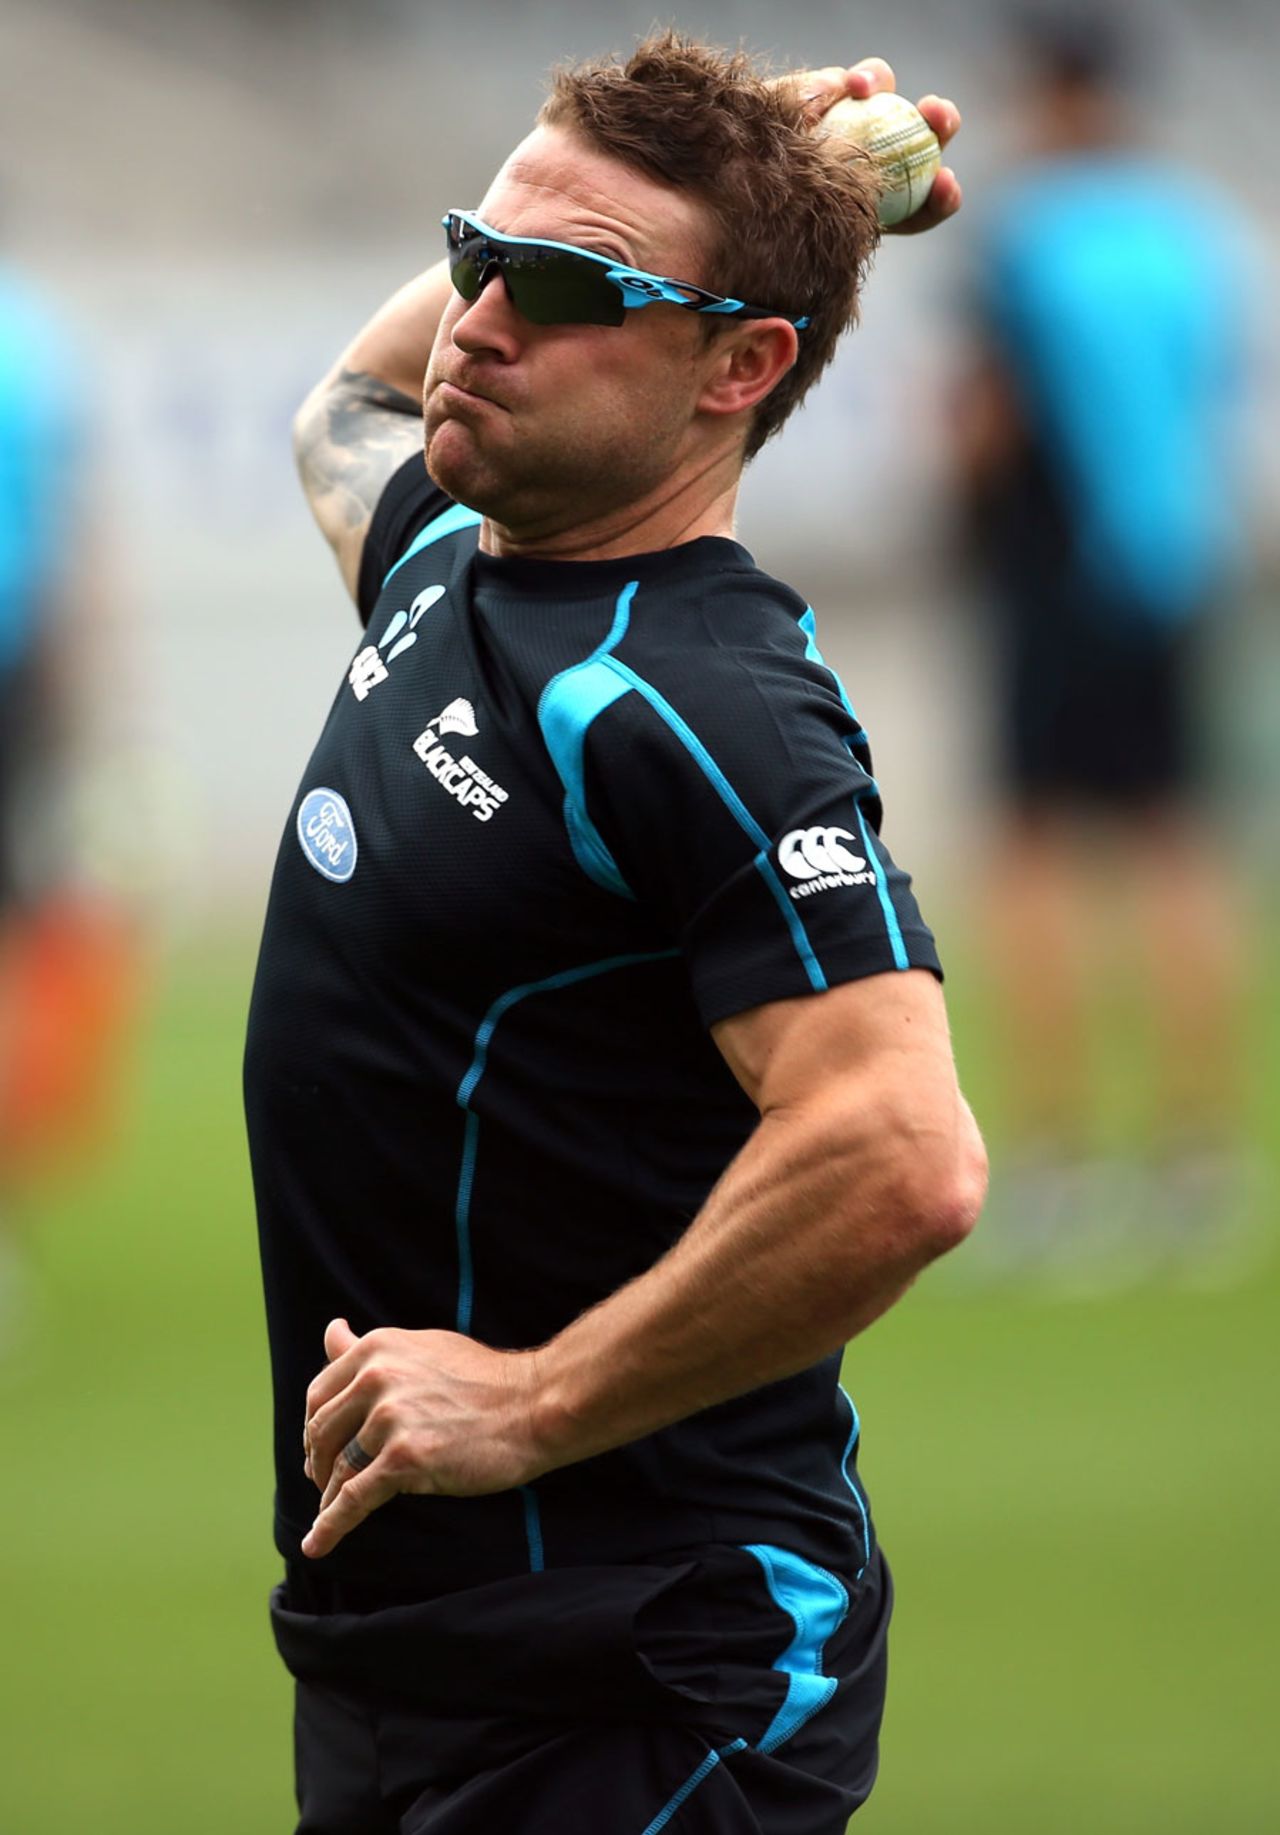 New Zealand captain Brendon McCullum practises before the final ODI against England, New Zealand v England, 3rd ODI, Auckland 